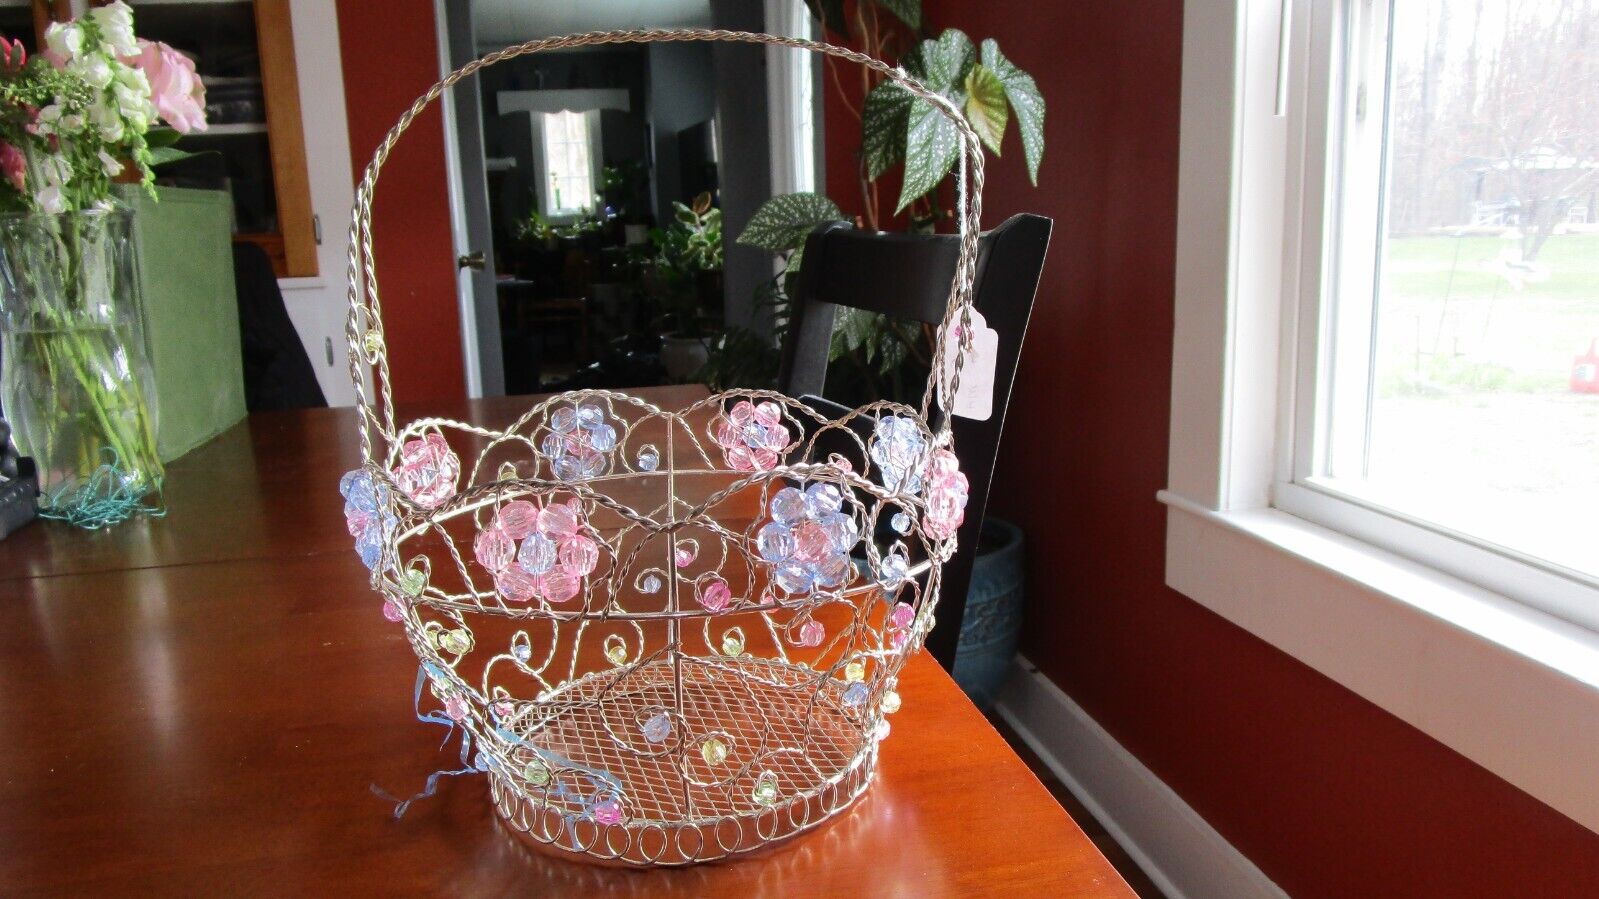 DECORATIVE METAL WIRE BEADED BASKET WITH PASTEL FLOWERS